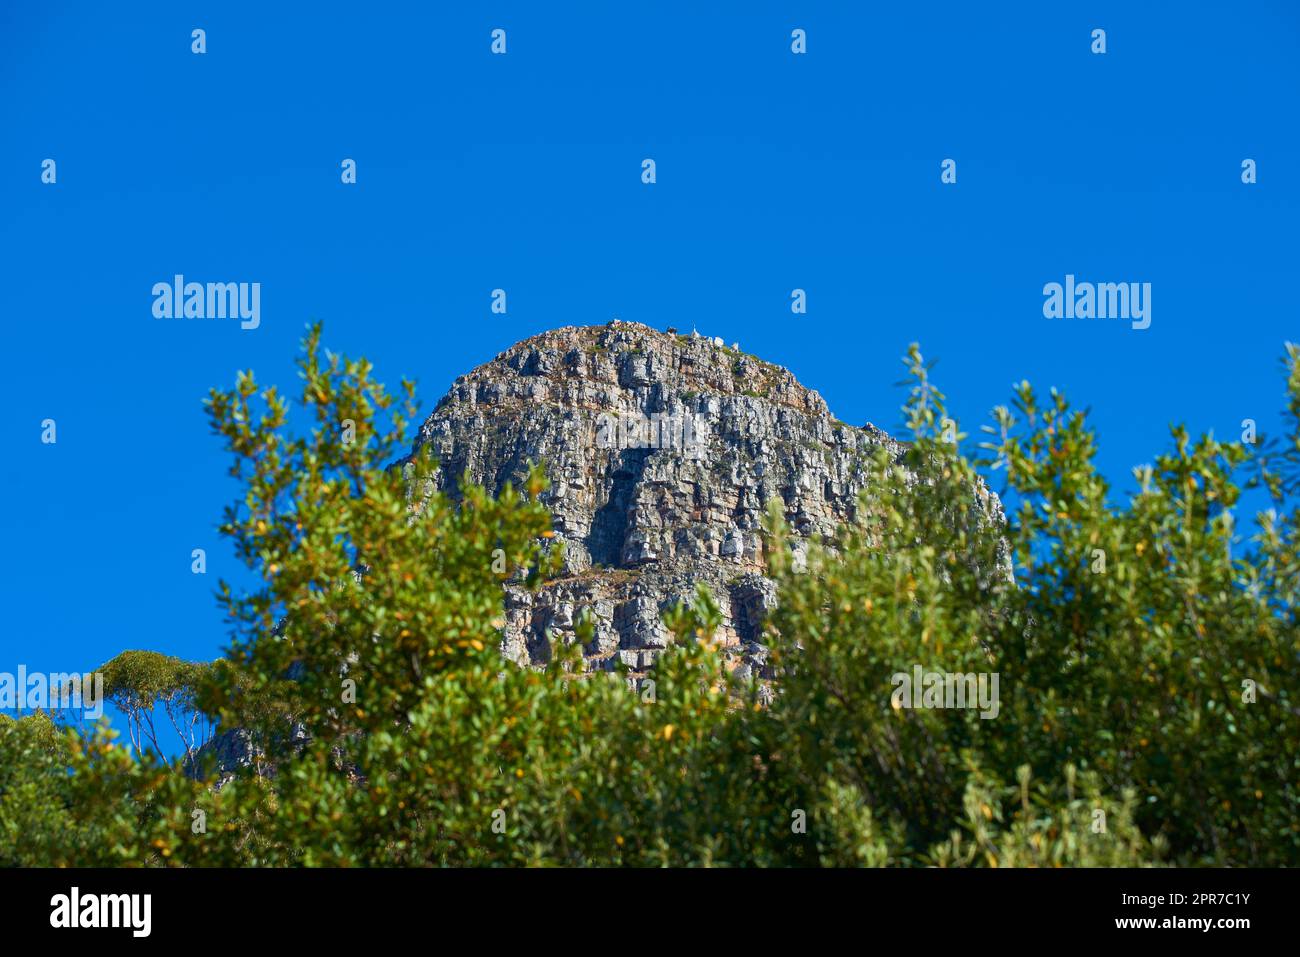 Panorama of Lions Head in Table Mountain National Park, Cape Town, South Africa with copy space. Beautiful landscape view of a peak in a blue sky on a summer day with lush green plants or trees Stock Photo